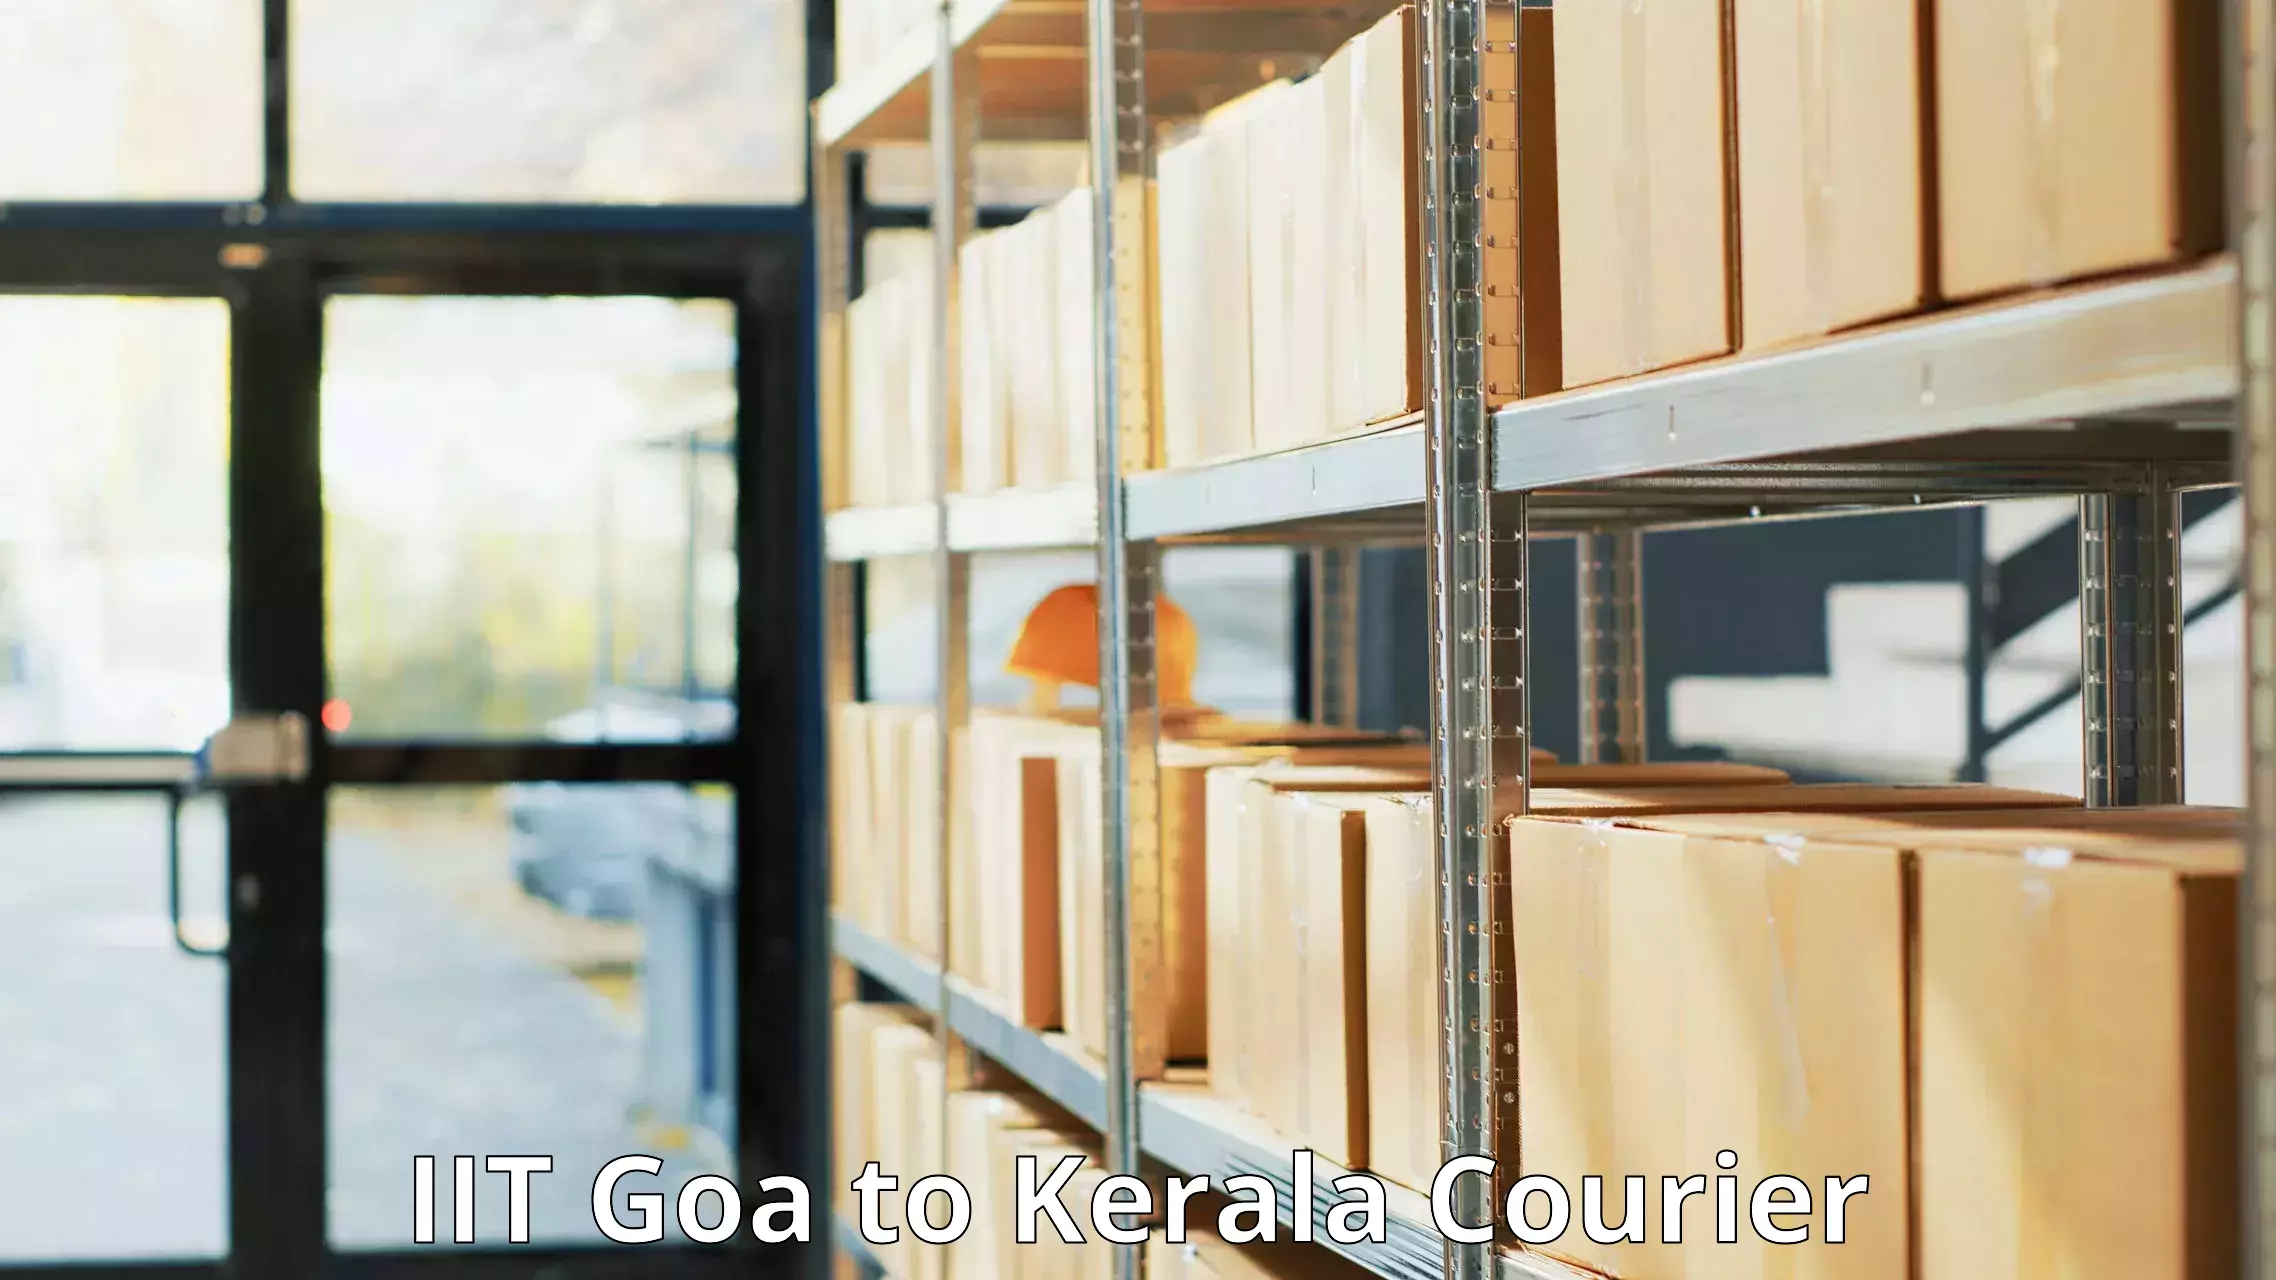 State-of-the-art courier technology in IIT Goa to Kerala